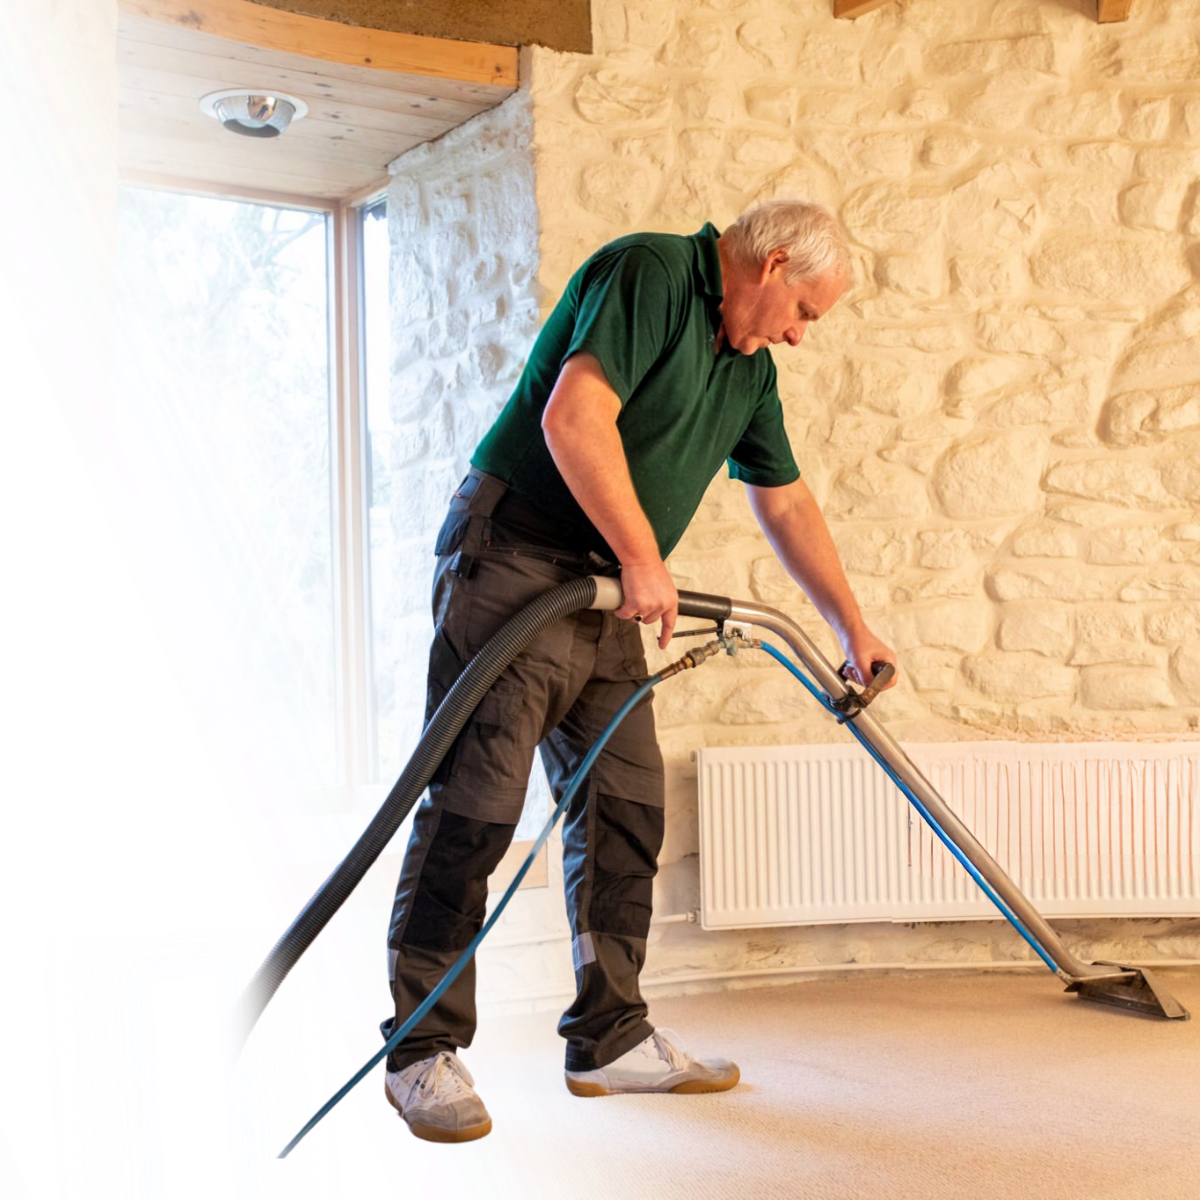 carpet cleaning manchester image 122